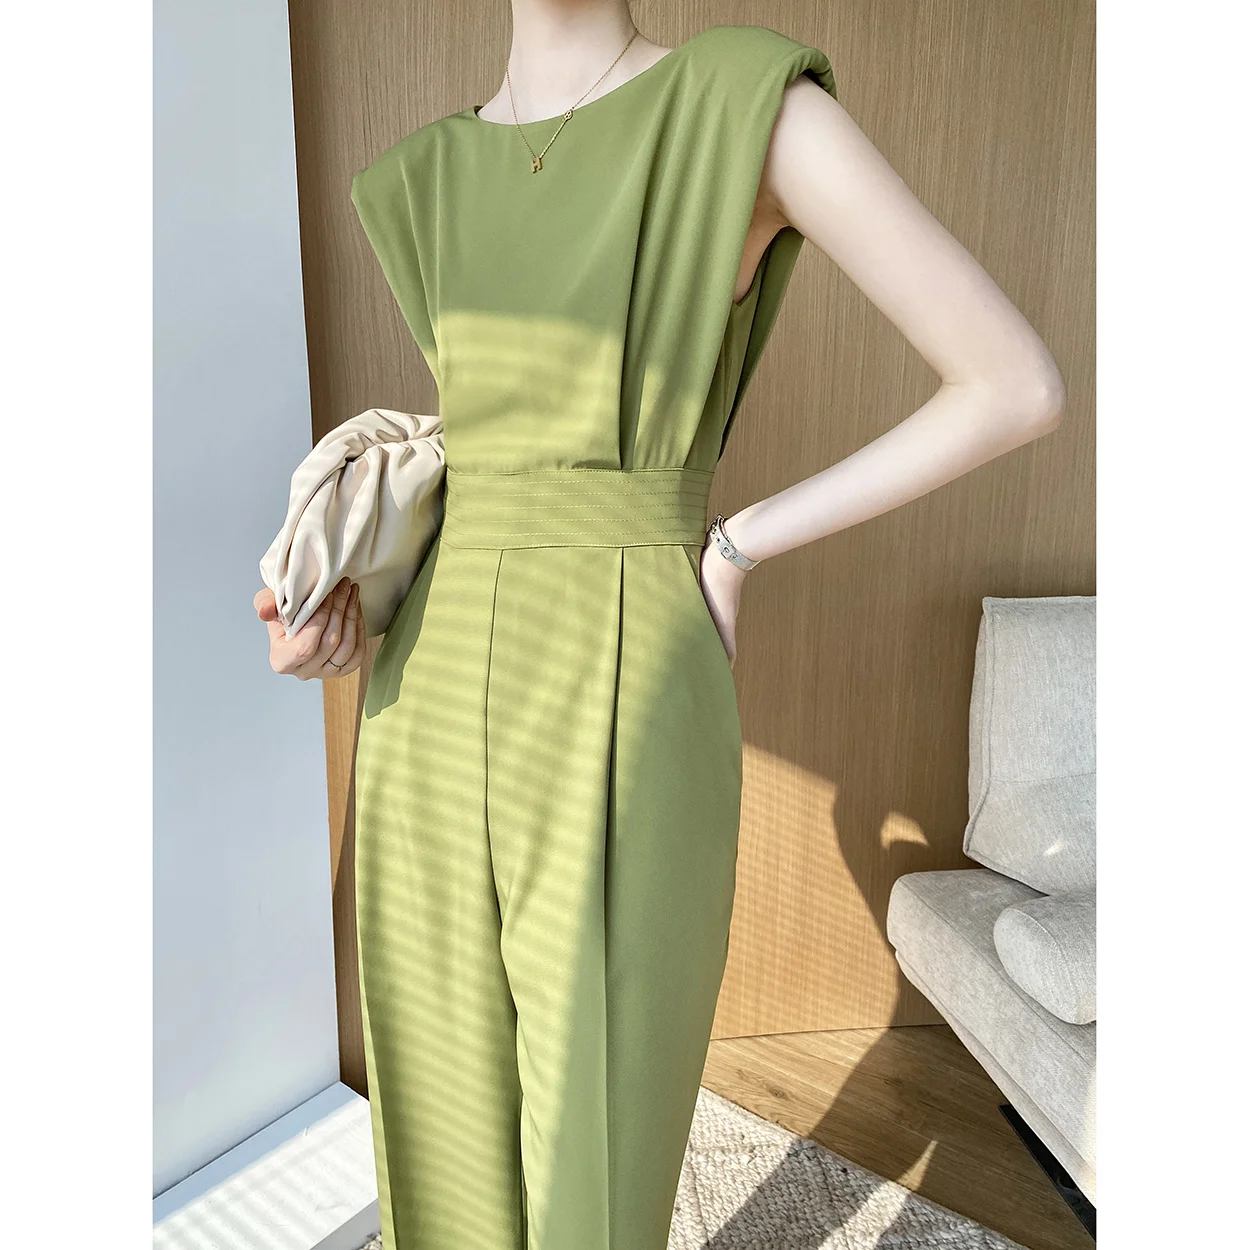 Sleeveless Jumpsuit for Green Women's High Quality Summer Shoulder Padded Jumpsuits